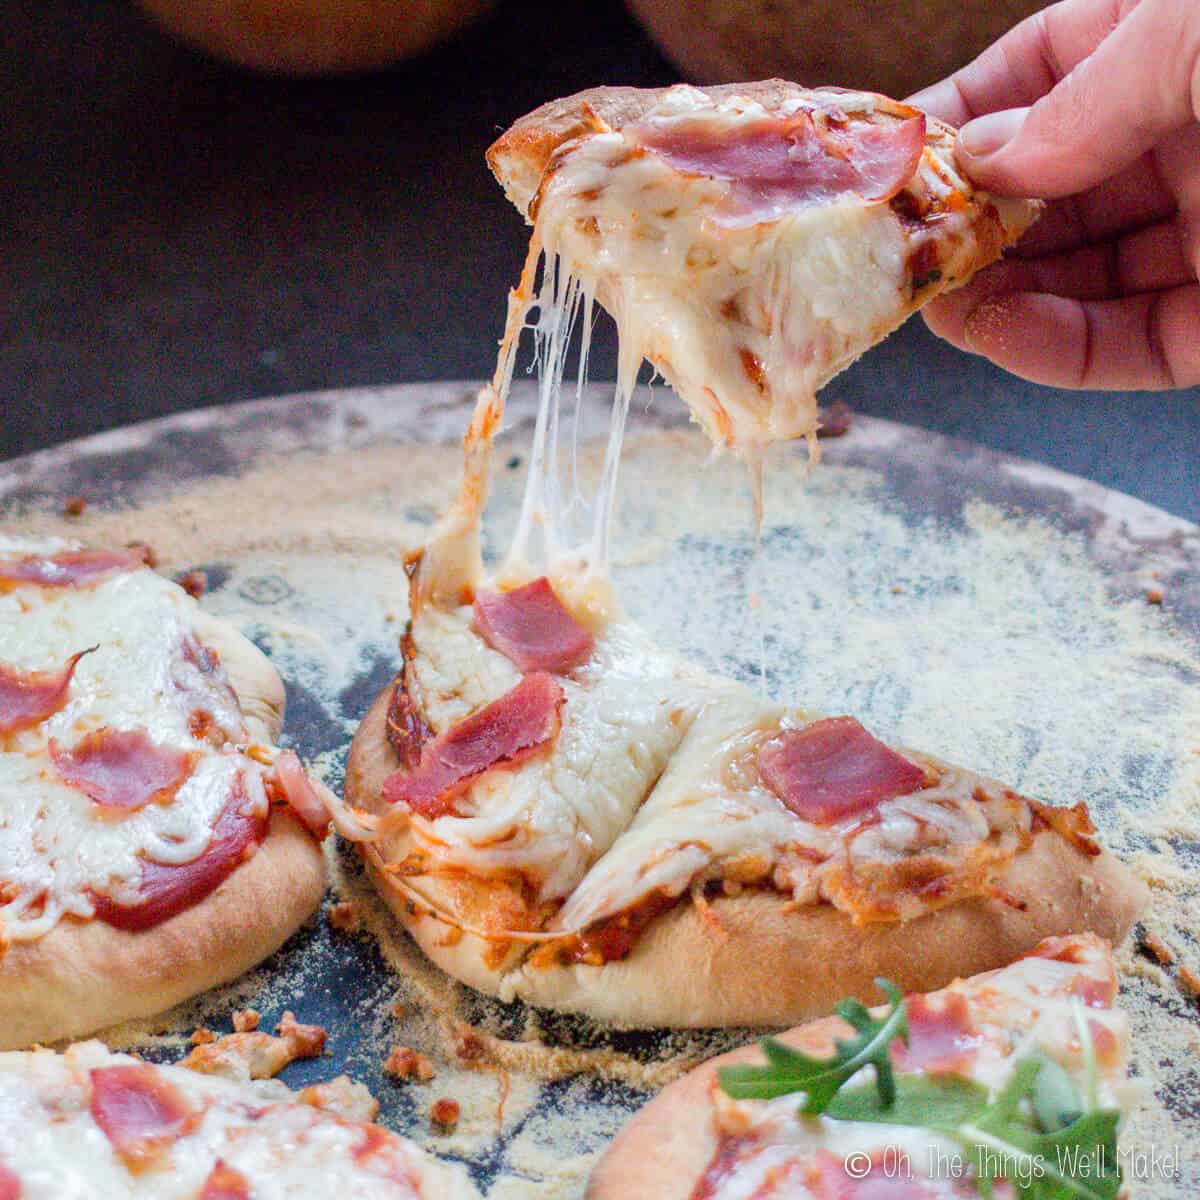 A hand lifting up a slice of mini pizzas with strings of cheese hanging down.